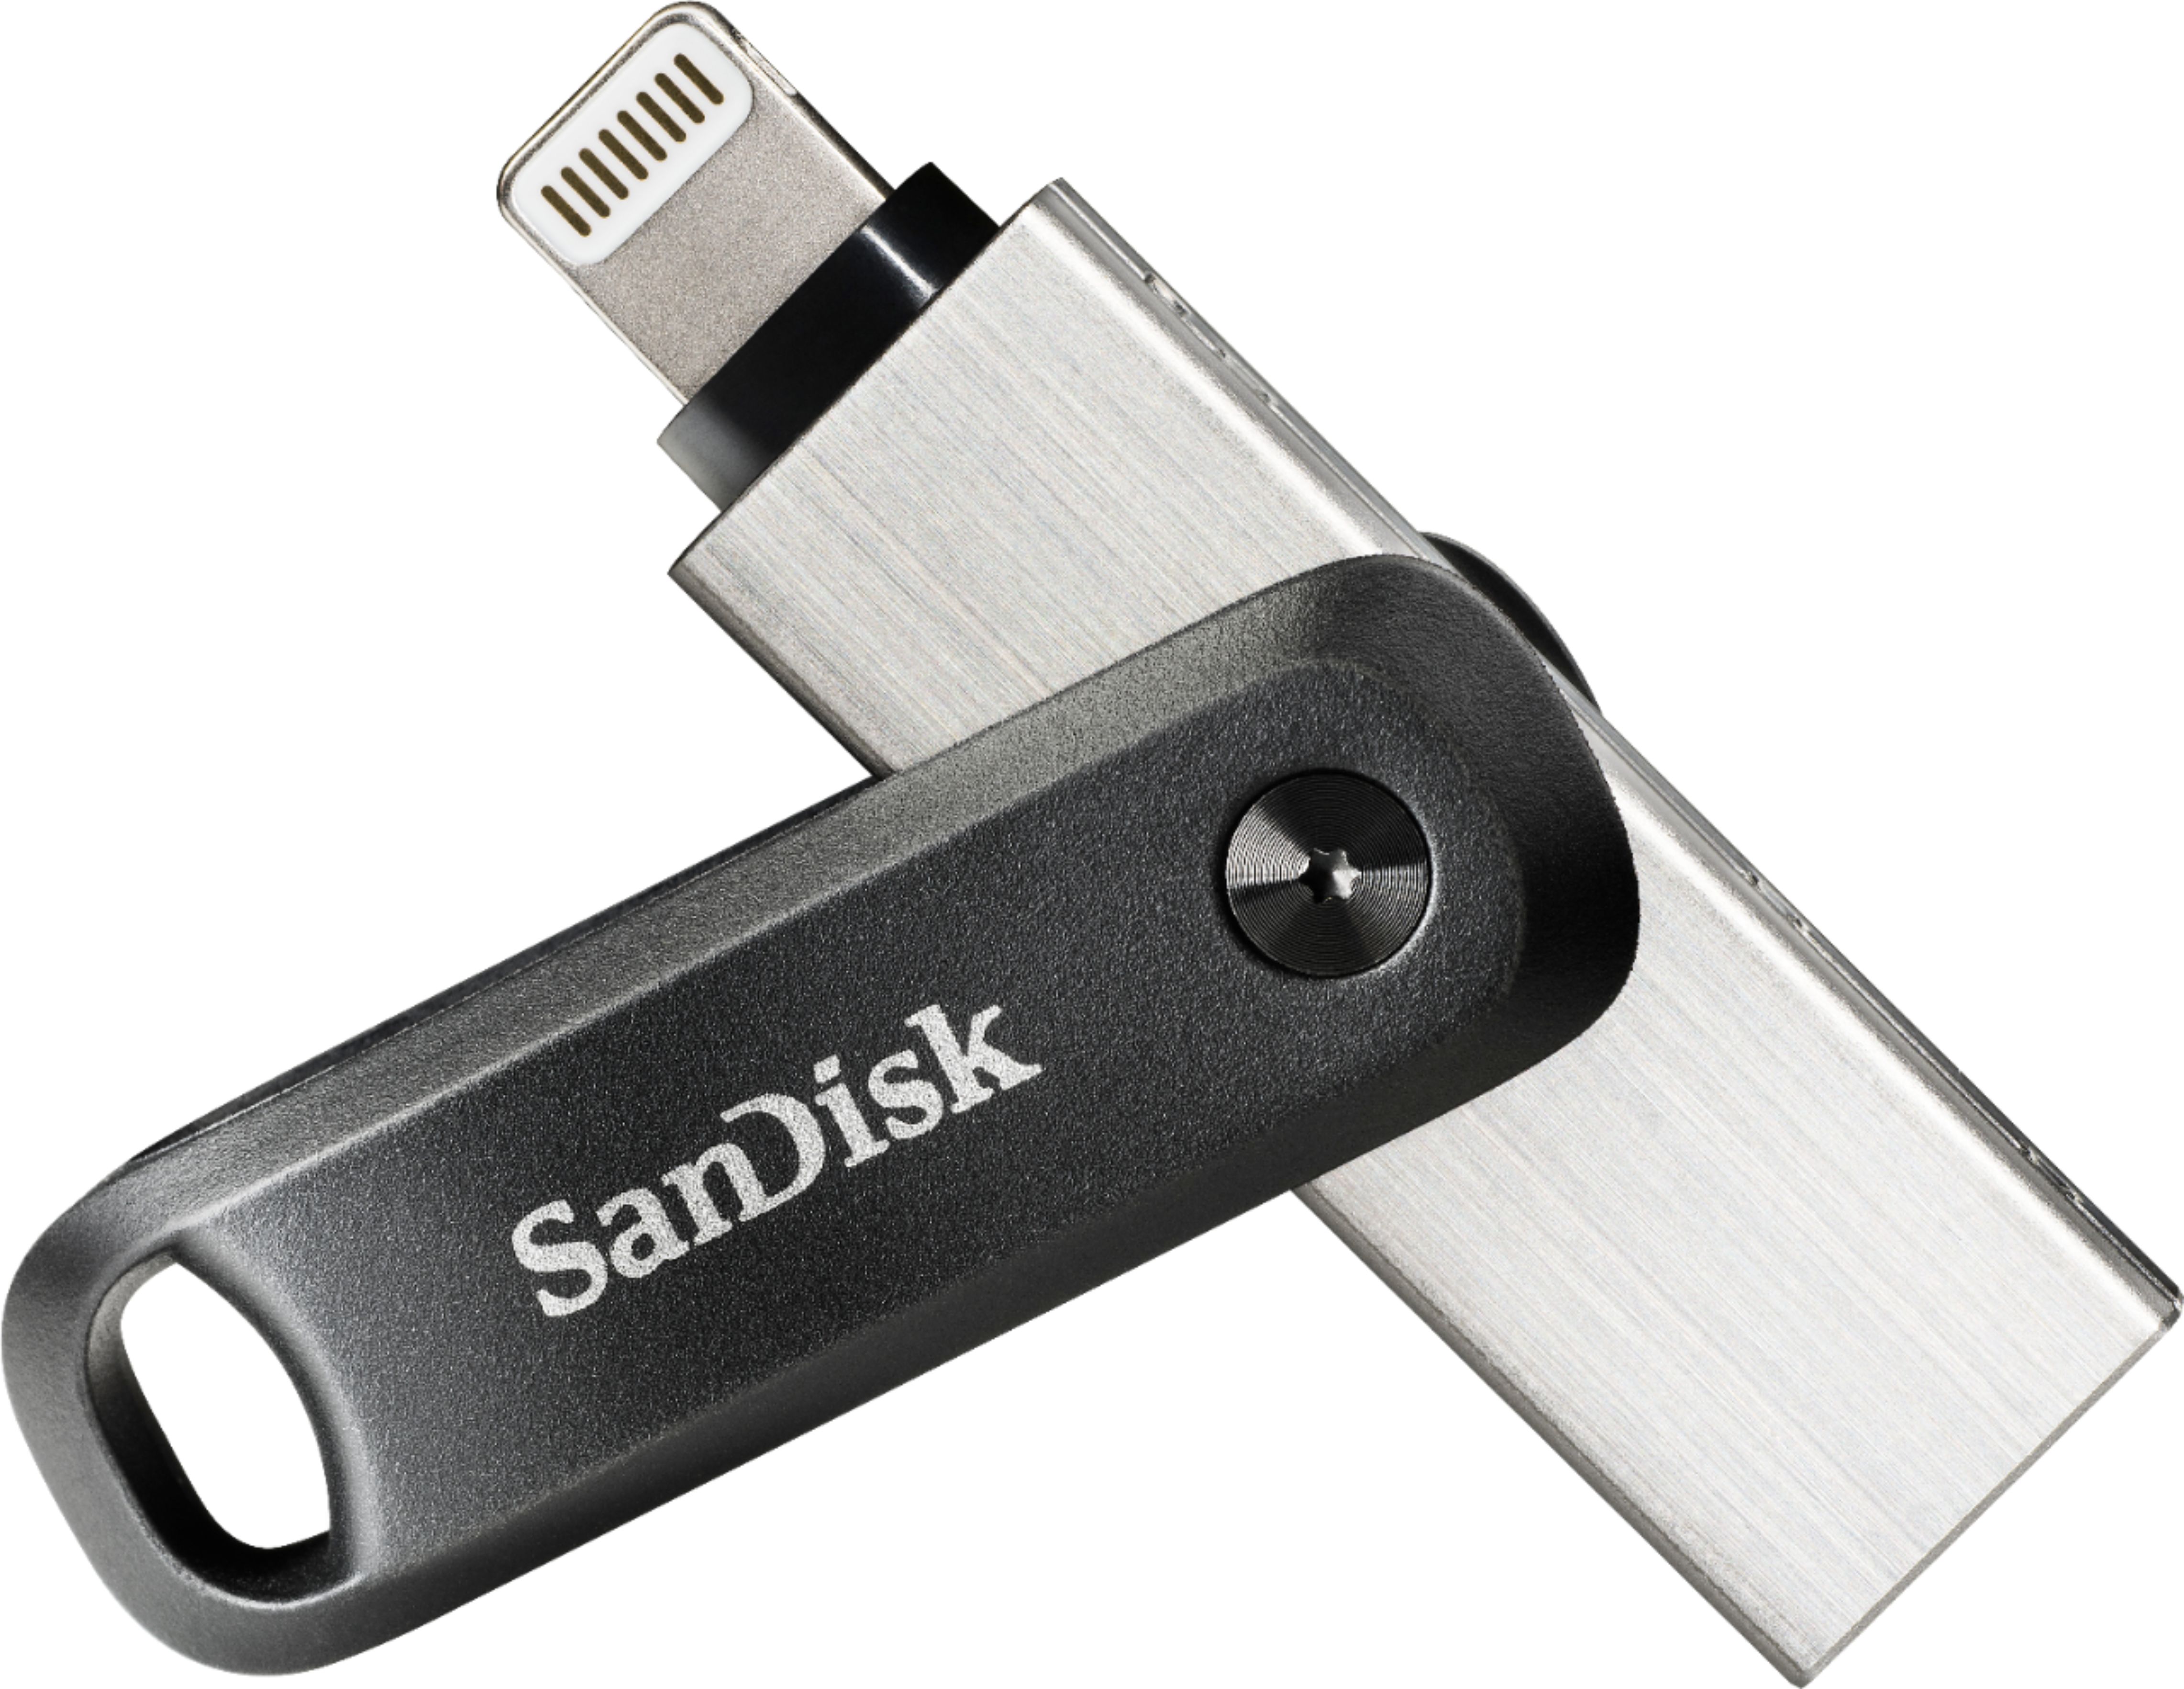 SanDisk iXpand Flash Drive Go 64GB USB 3.0 Type-A to Apple for & iPad Black / Silver SDIX60N-064G-AN6NN - Best Buy